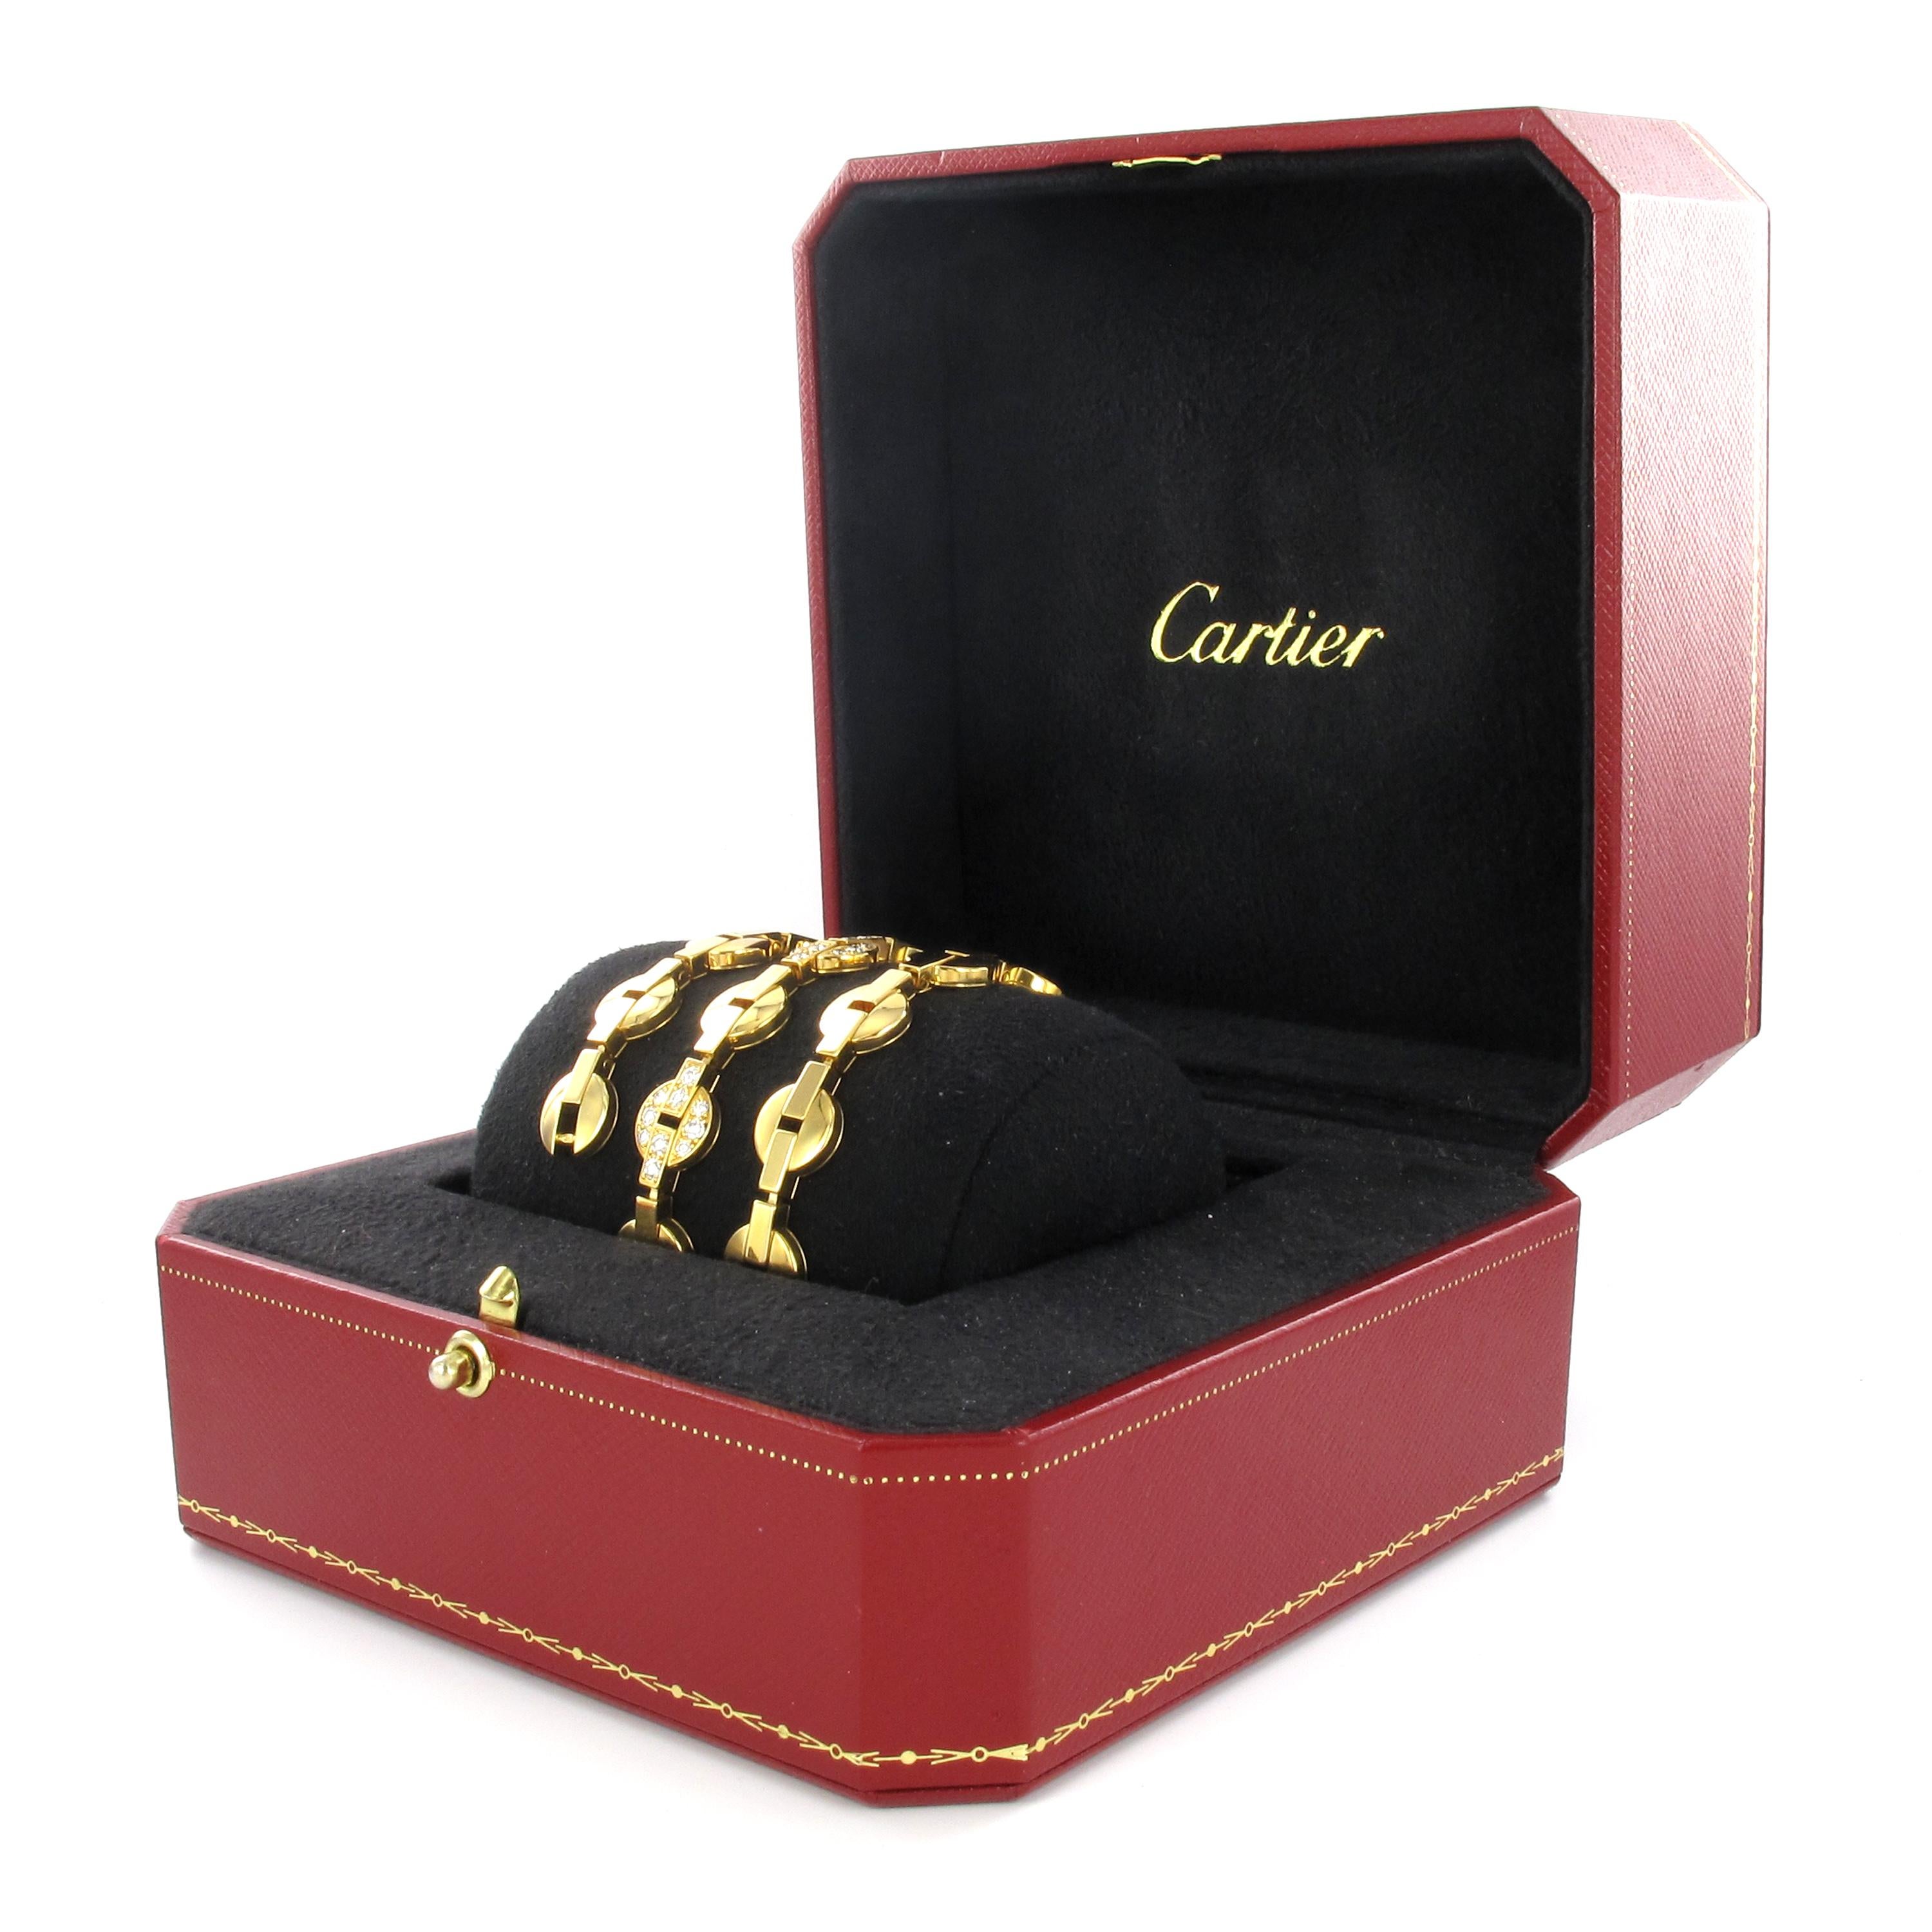 Fine Cartier necklace in yellow gold 750 from the Himalia Collection. The necklace is in excellent condition and comes with original box and original Cartier Certificate. 9 links are set with a total of 90 brilliant cut diamonds of 3.00 ct in